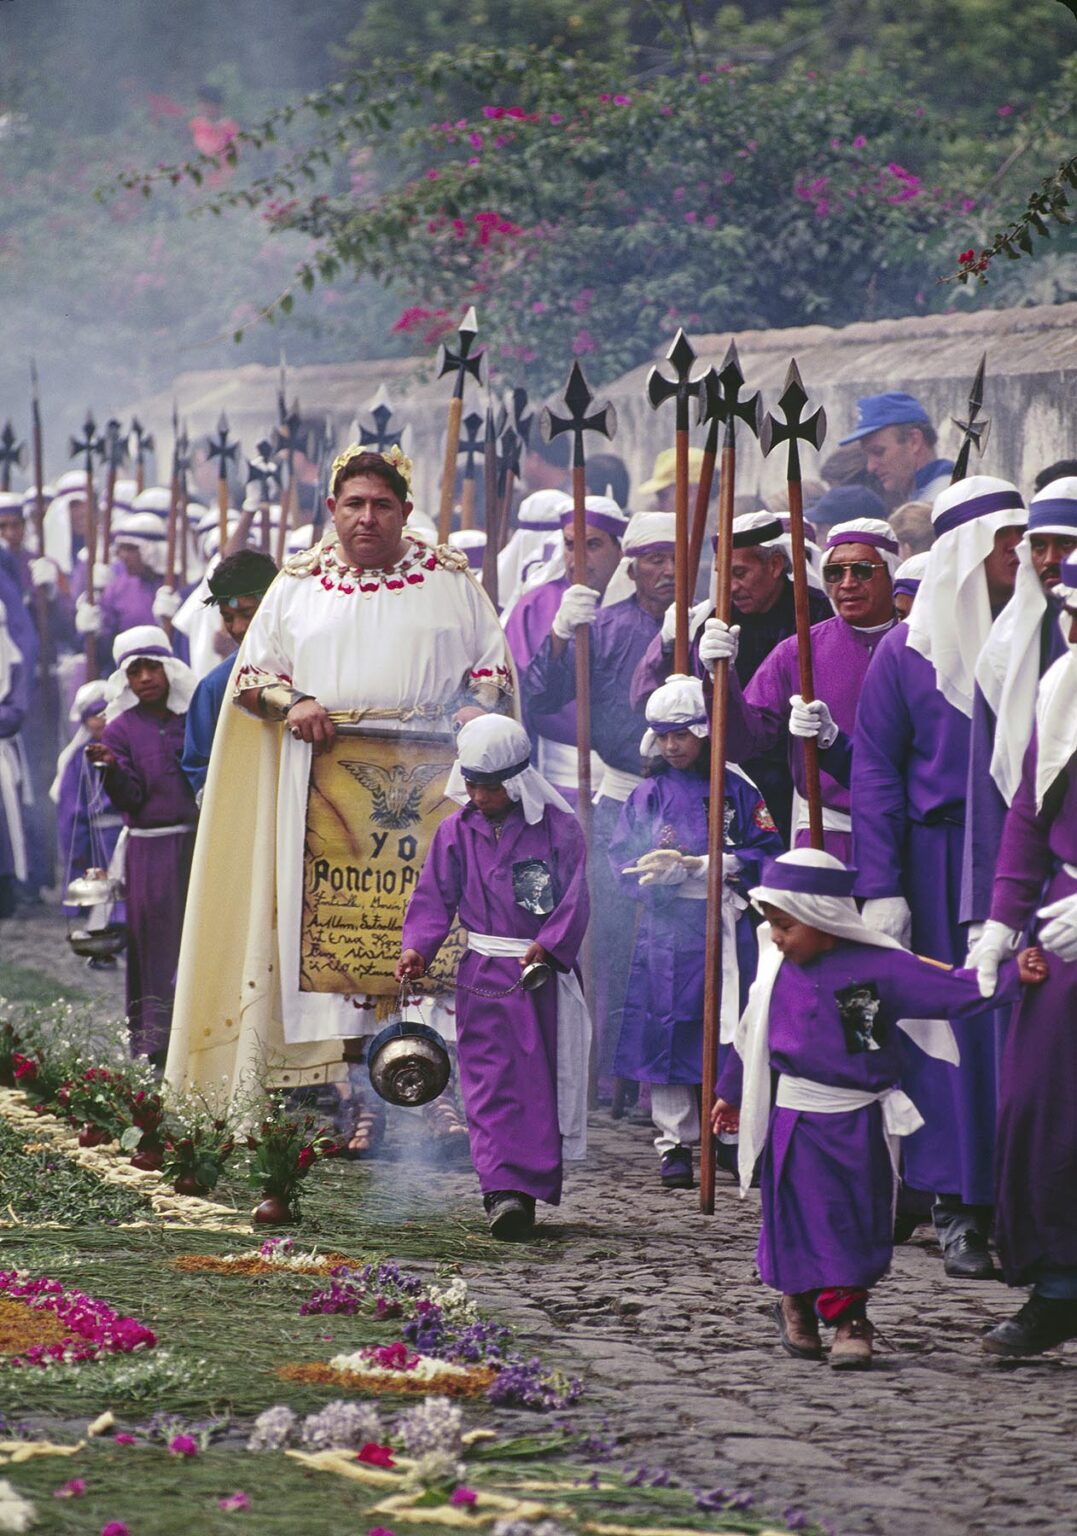 PONTIUS PILOT, the Roman consul who sentenced CHRIST, during staging of the CRUCIFICATION - ANTIGUA, GUATEMALA